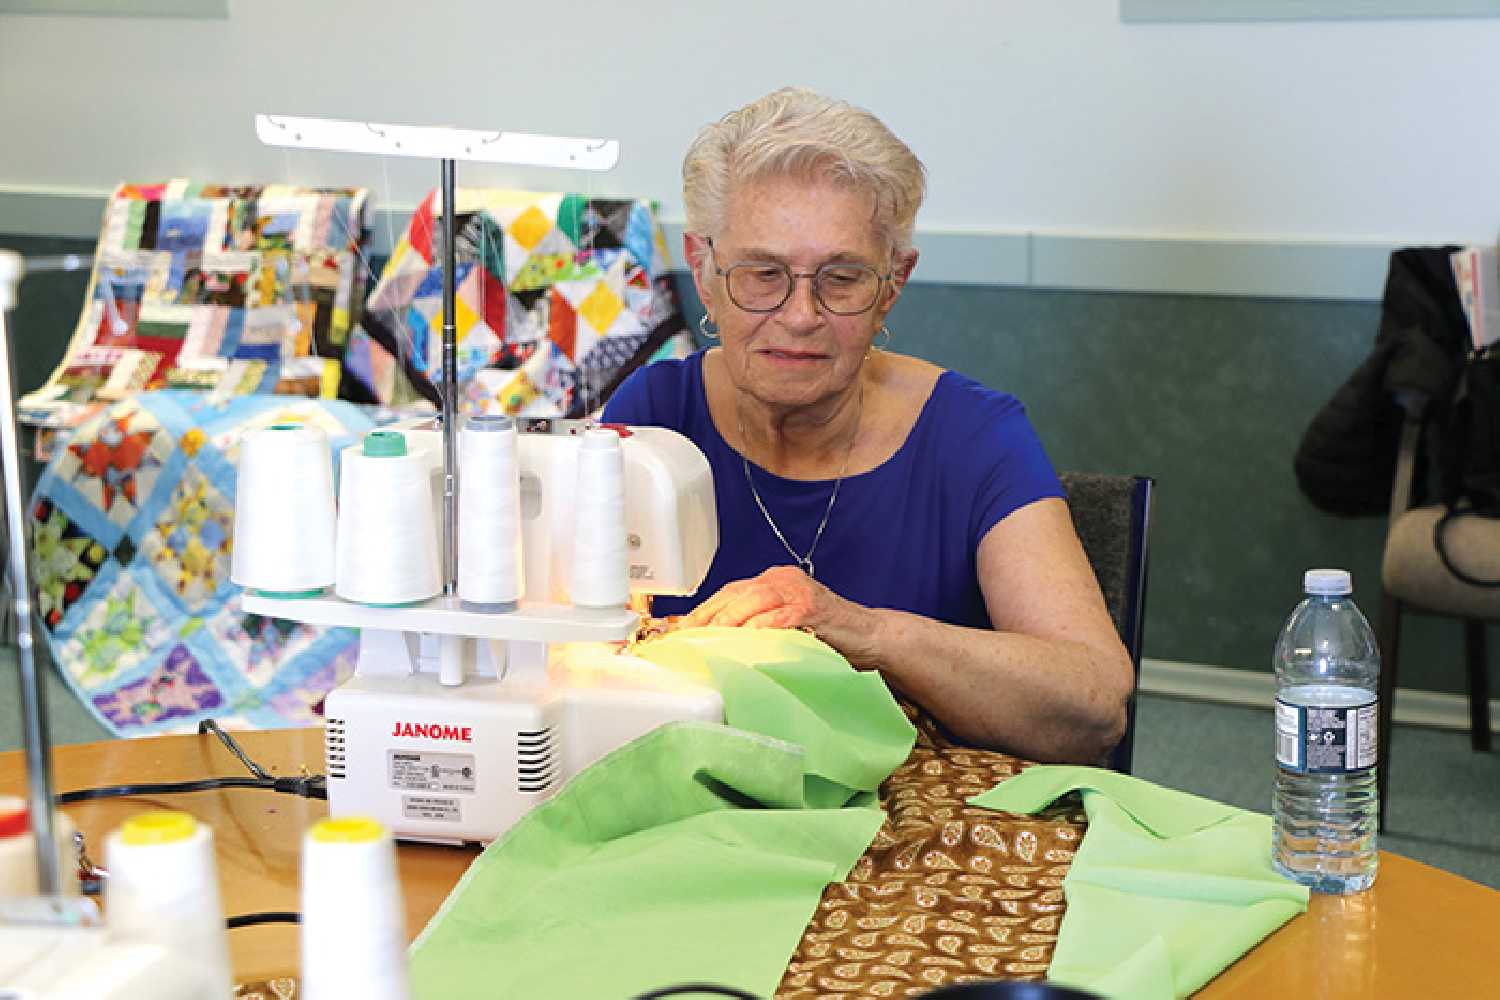 Suzanne Eisler of Wawota sews little dresses to be distributed to children in developing countries. Eisler will be honored with a Saskatchewan Volunteer Medal, which will be presented at Government House later this month.